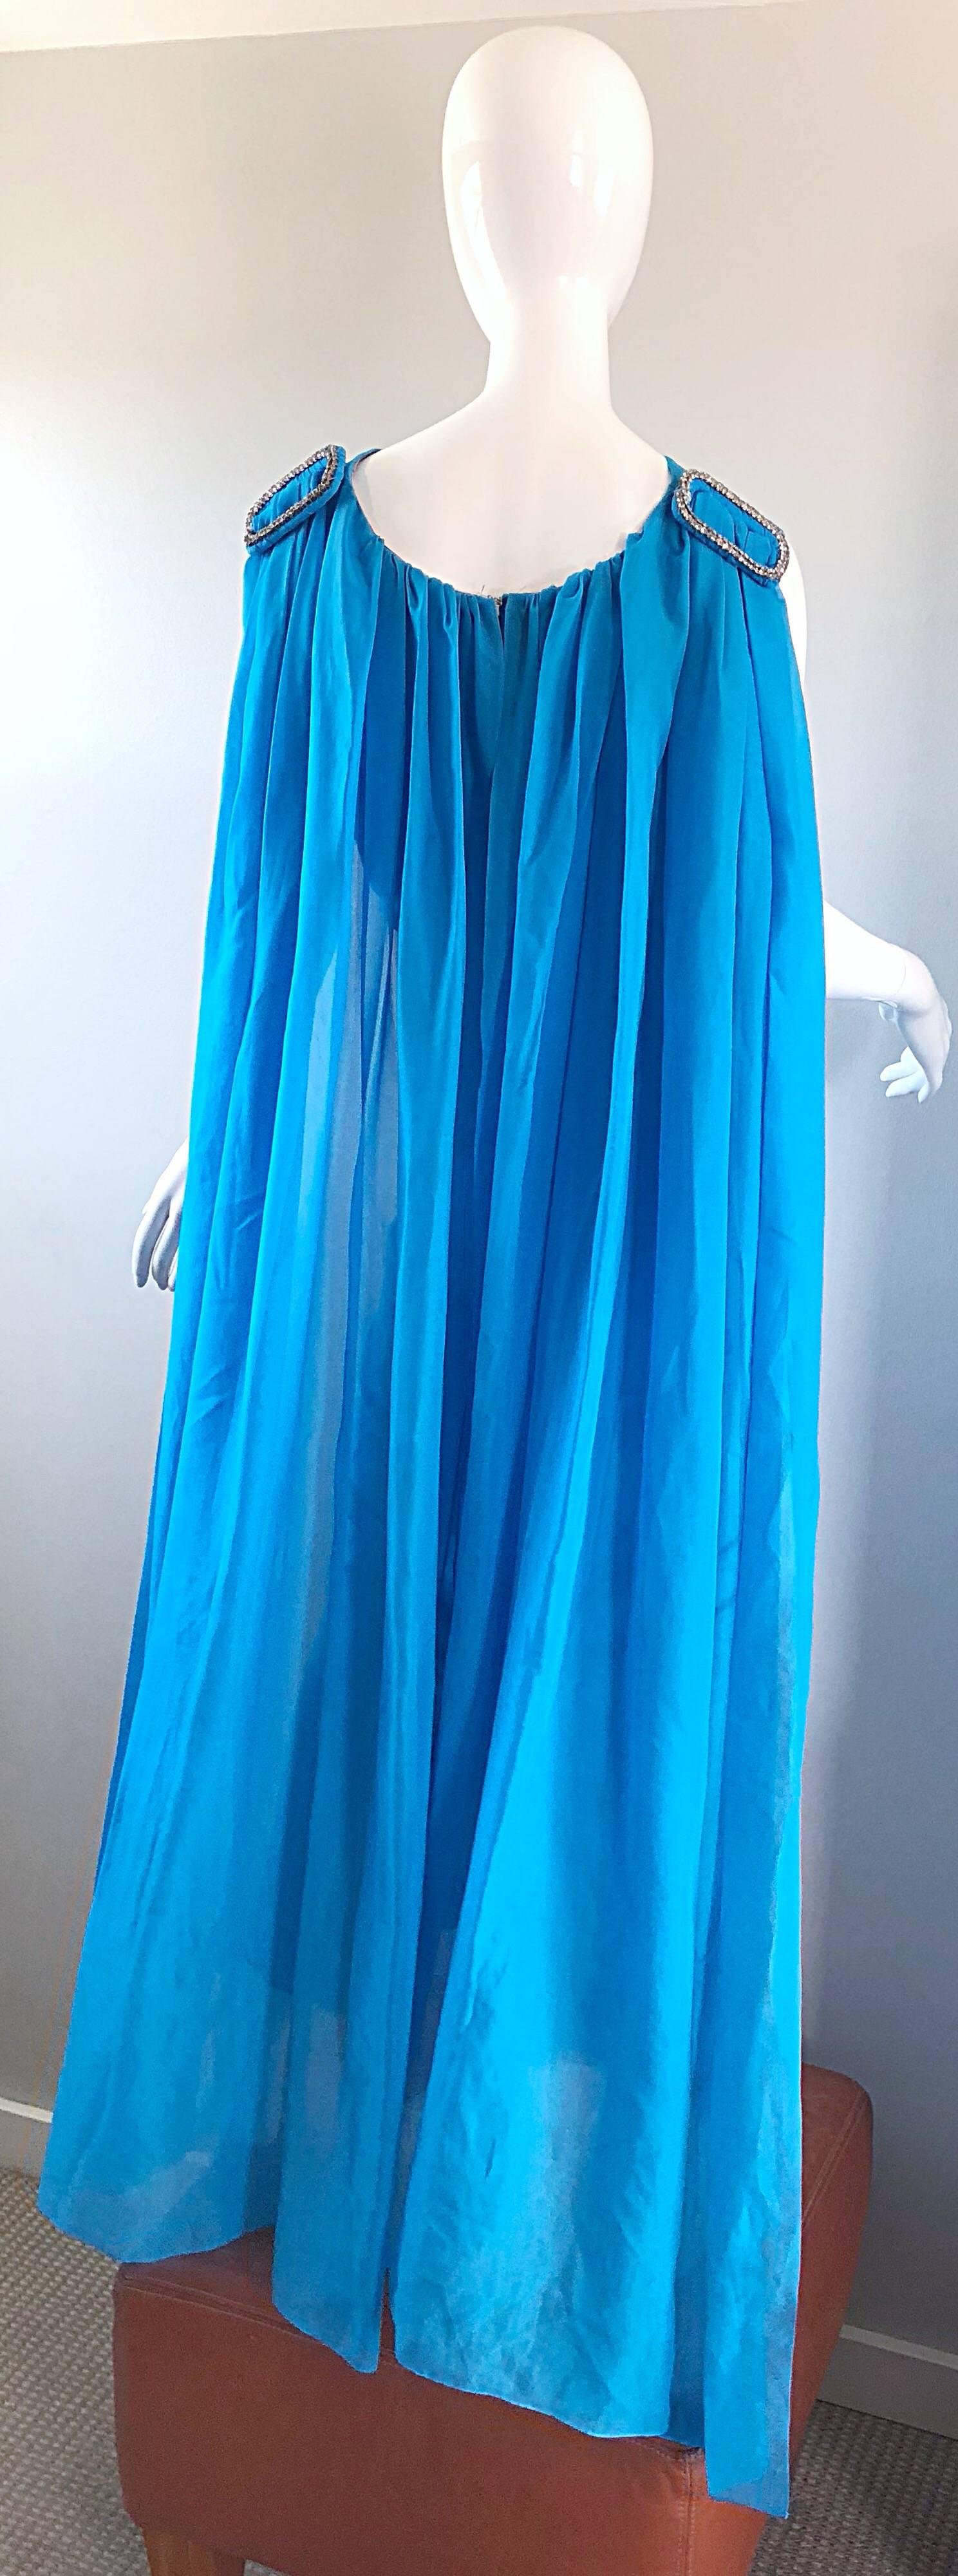 Incredible late 60s turquoise blue chiffon rhinestone encrusted gown with attached cape! Wonderful tailored fit with a fitted bodice and skirt. Attached semi sheer chiffon cape features a large rhinestone encrusted buckle on each back shoulder.